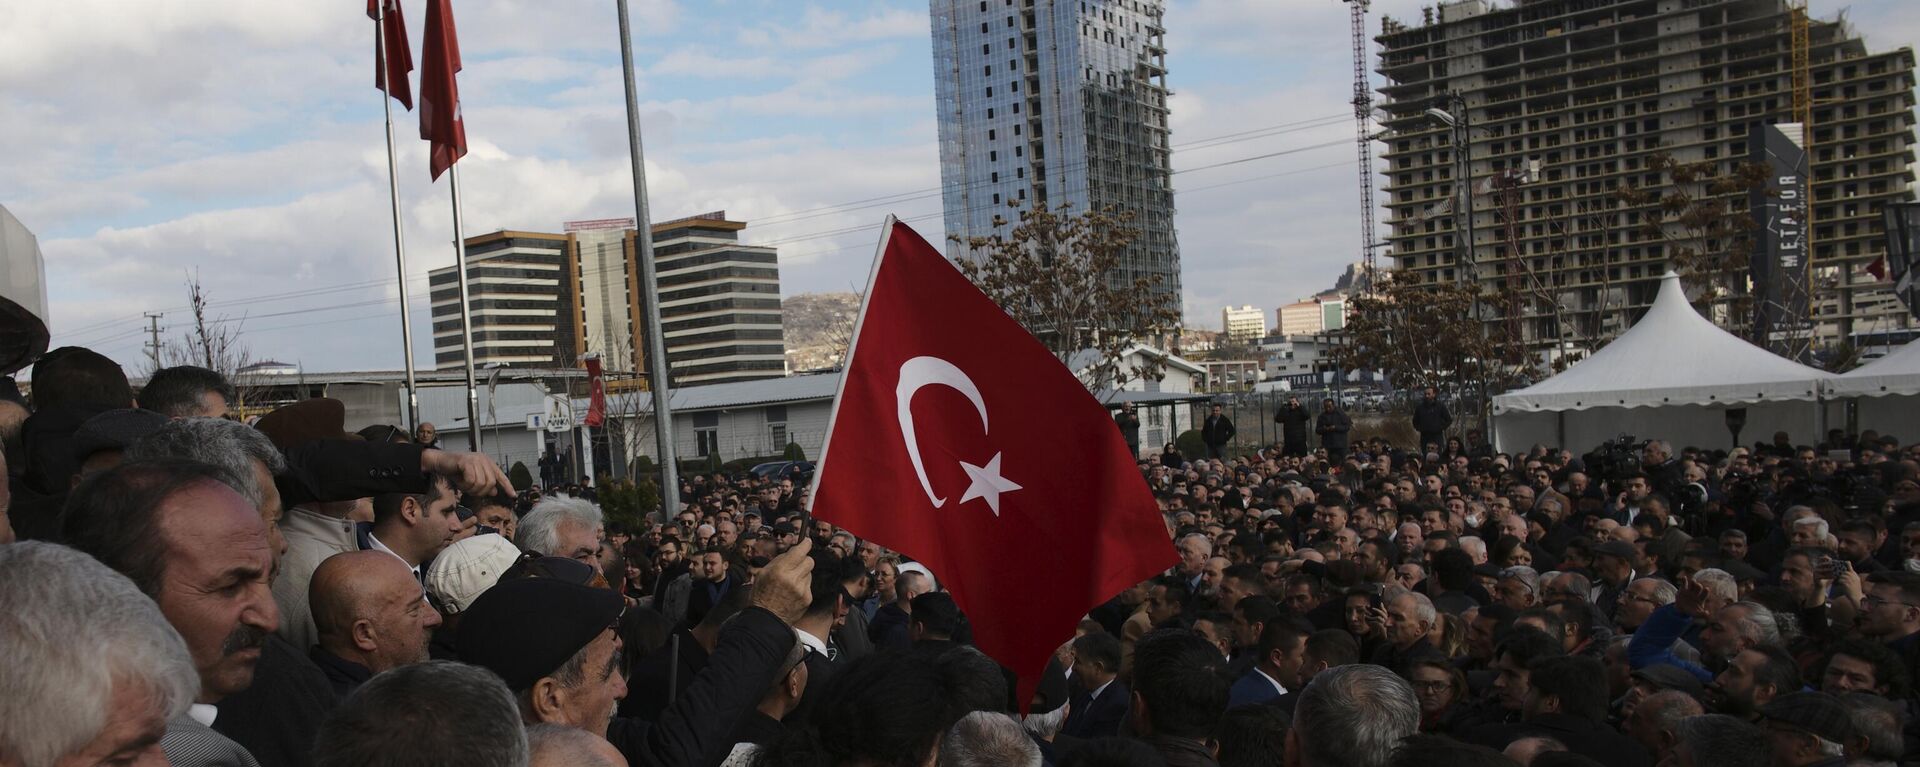 People wait before Kemal Kilicdaroglu, the leader of the pro-secular, center-left Republican People's Party, or CHP, is nominated by a six-party alliance as its common candidate to challenge President Recep Tayyip Erdogan, in Ankara, Turkey, March 6, 2023. - Sputnik Africa, 1920, 22.04.2023